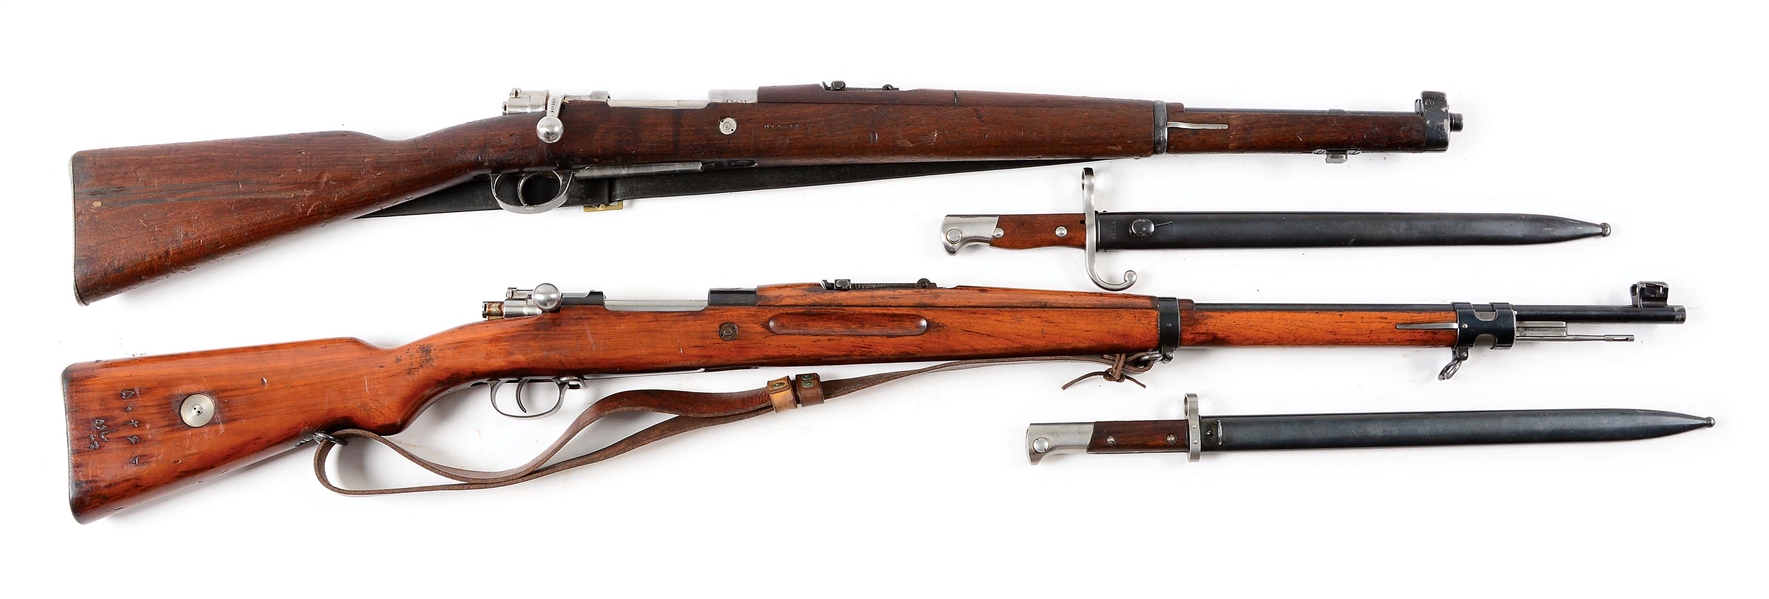 (C) LOT OF 2 FOREIGN MILITARY MAUSER RIFLES: ARGENTINE 1909 CAVALRY CARBINE & PERSIAN 98/29 MAUSER RIFLE